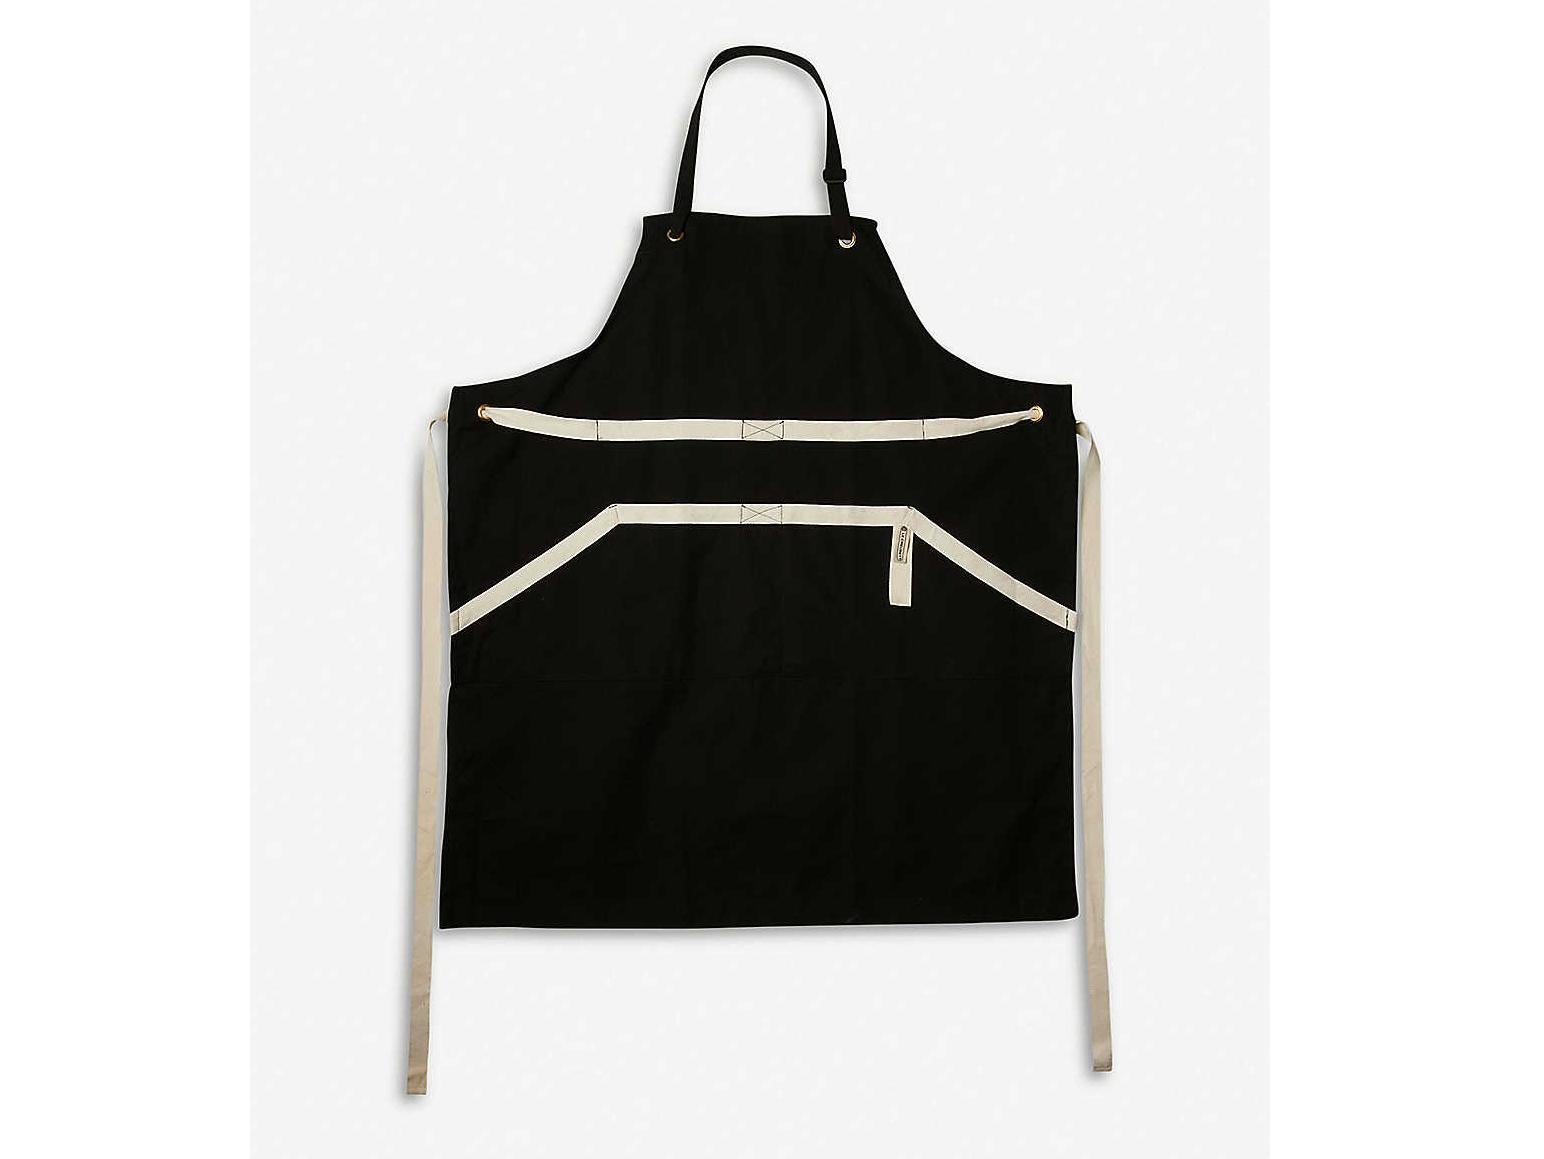 This apron from Le Creuset has a front pocket to keep your phone safe and splash-free while you’re manning the grill (